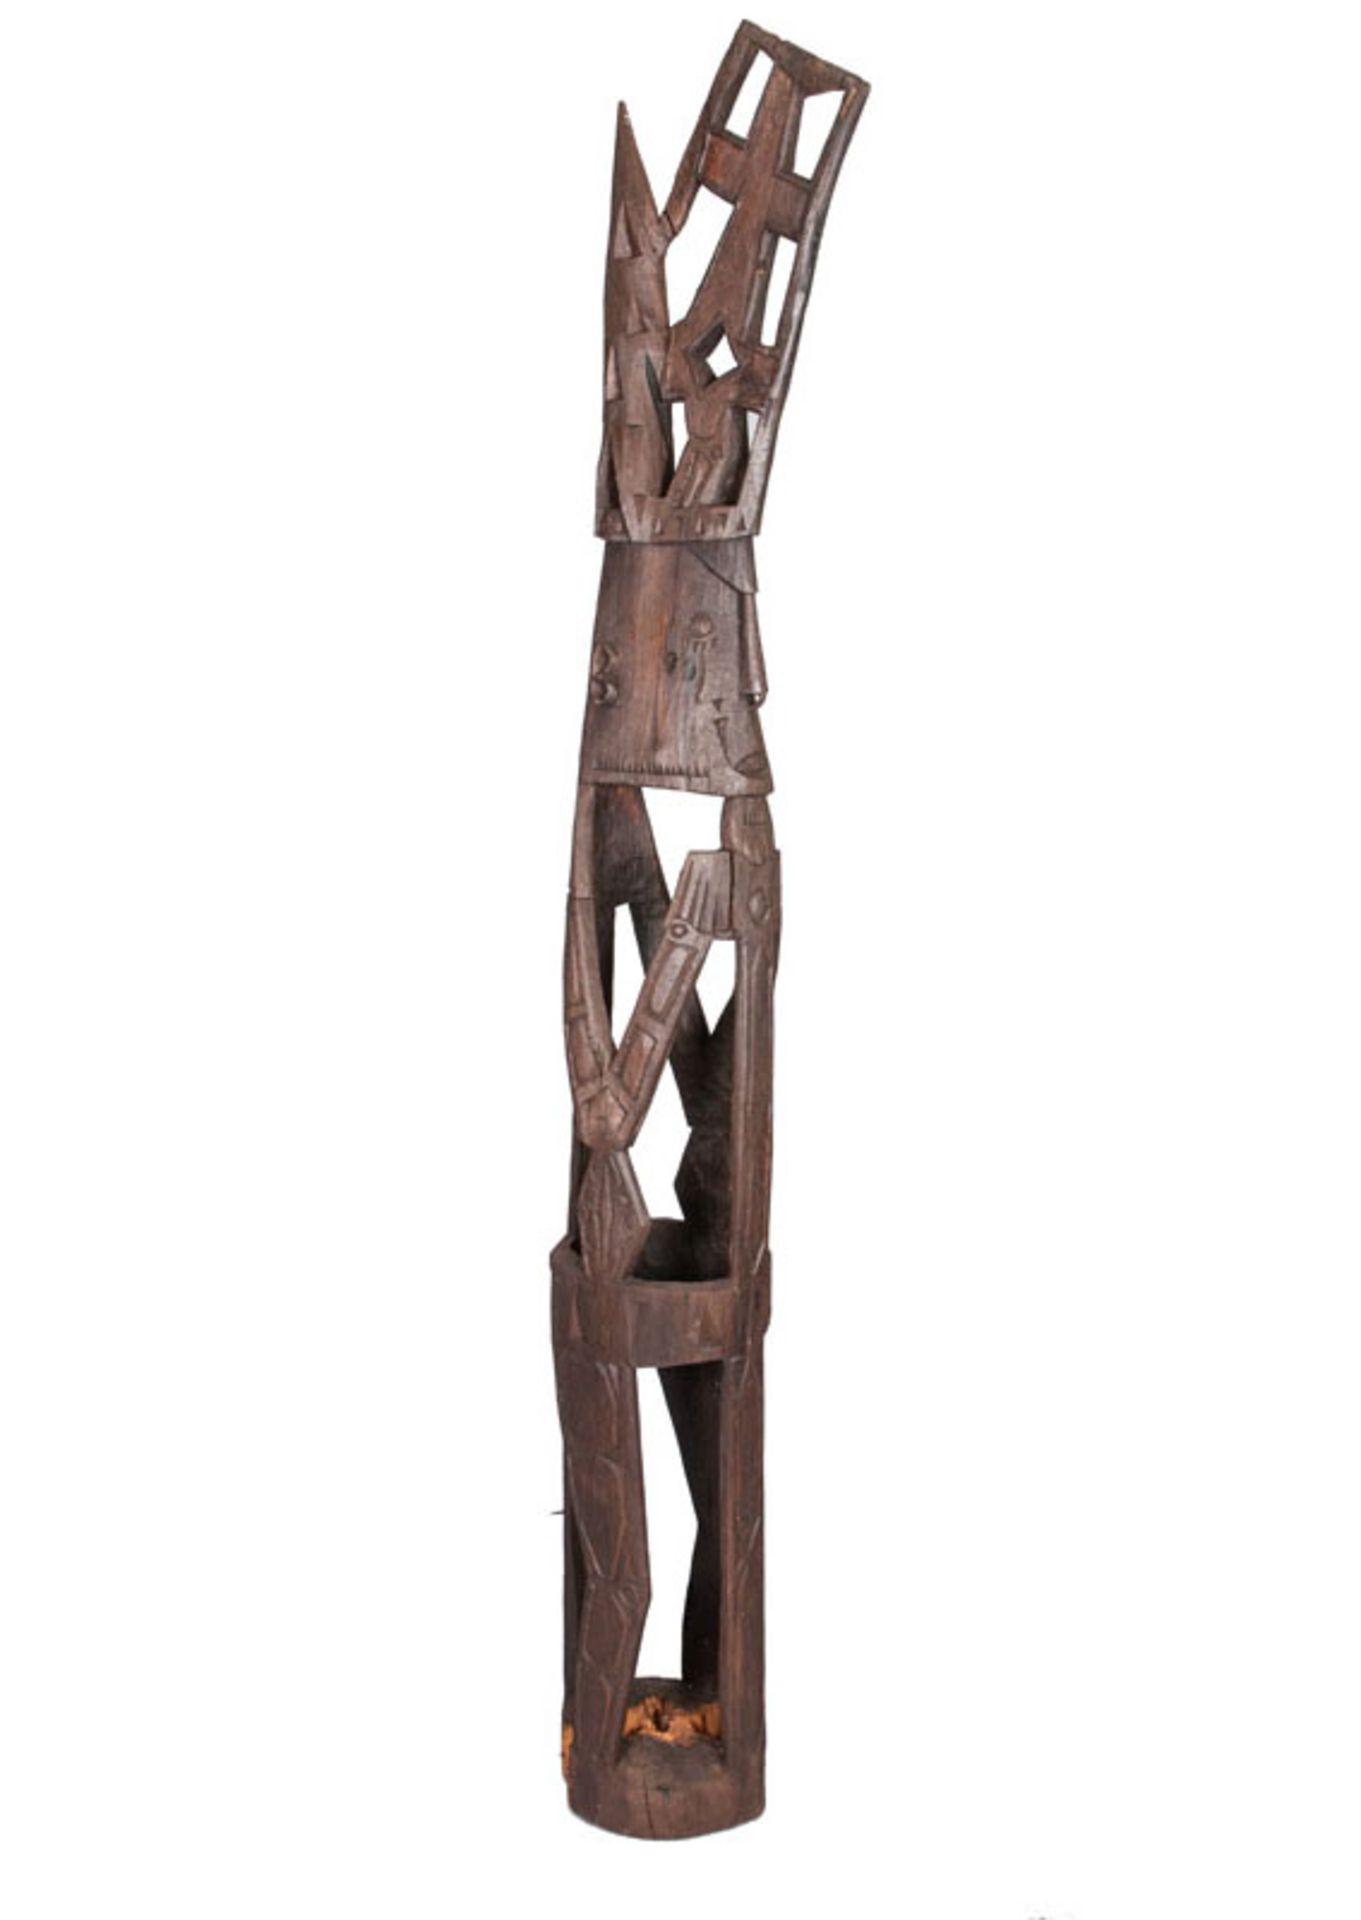 An impressive Asmat wooden figure 'Mbitoro' Indonesia, 20th cent. Carved and dark brown patinated